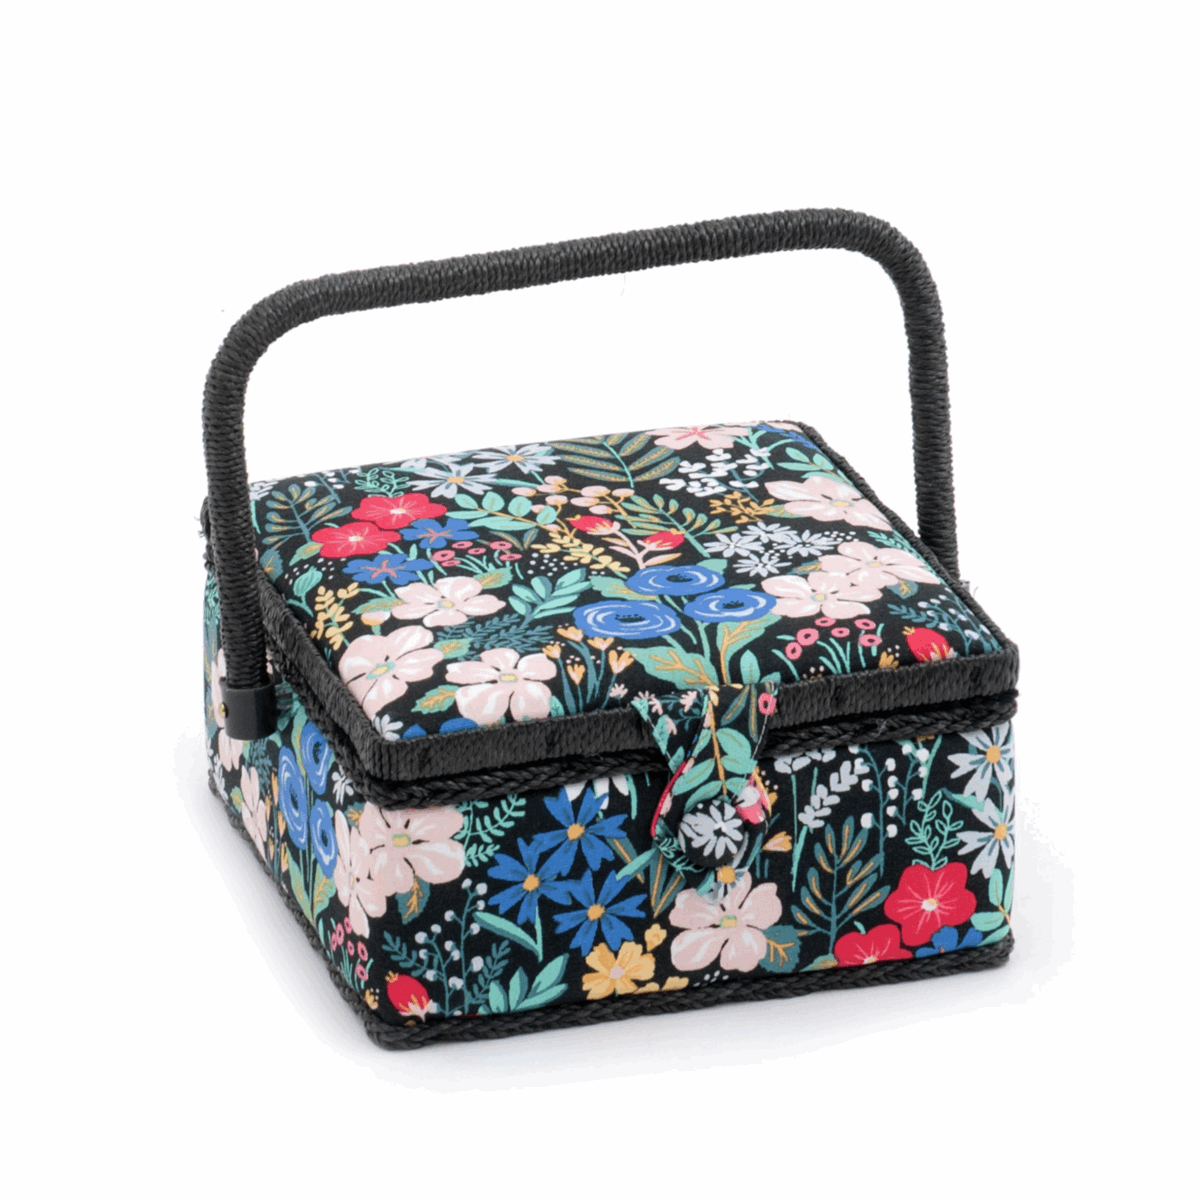 Summertime Sewing Box - Small Square